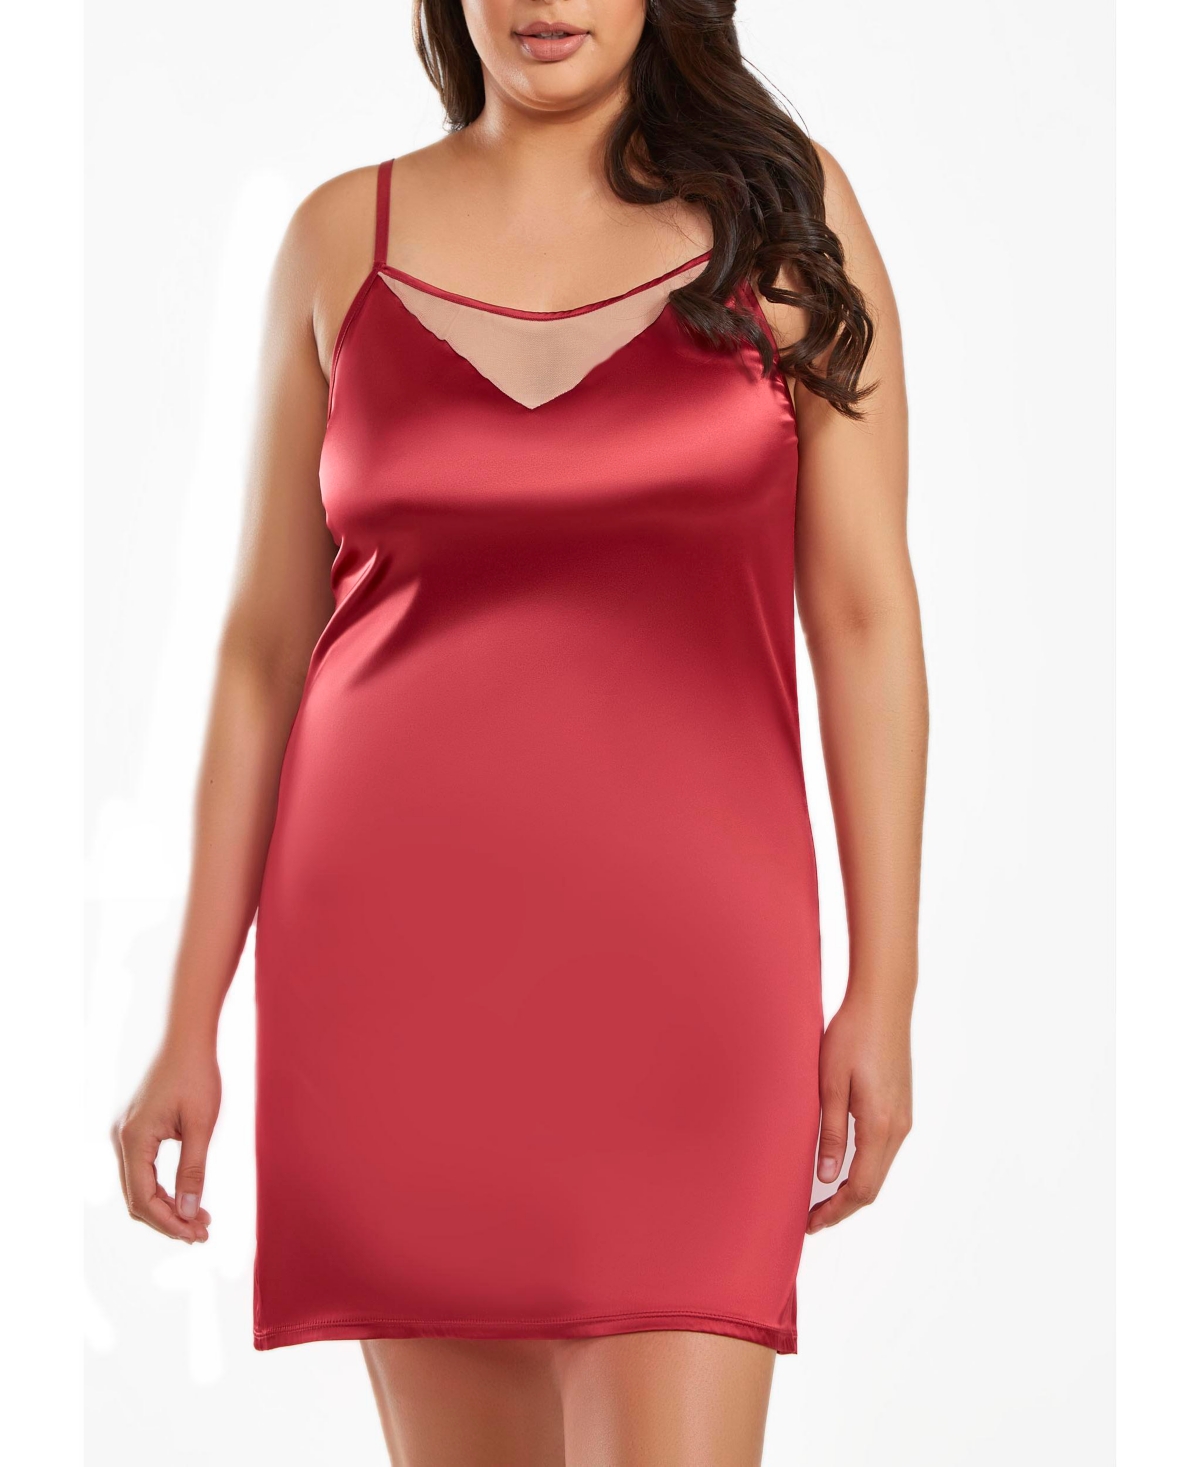 Shop Icollection Jenna Plus Size Contrast Nude And Burgundy Satin Chemise